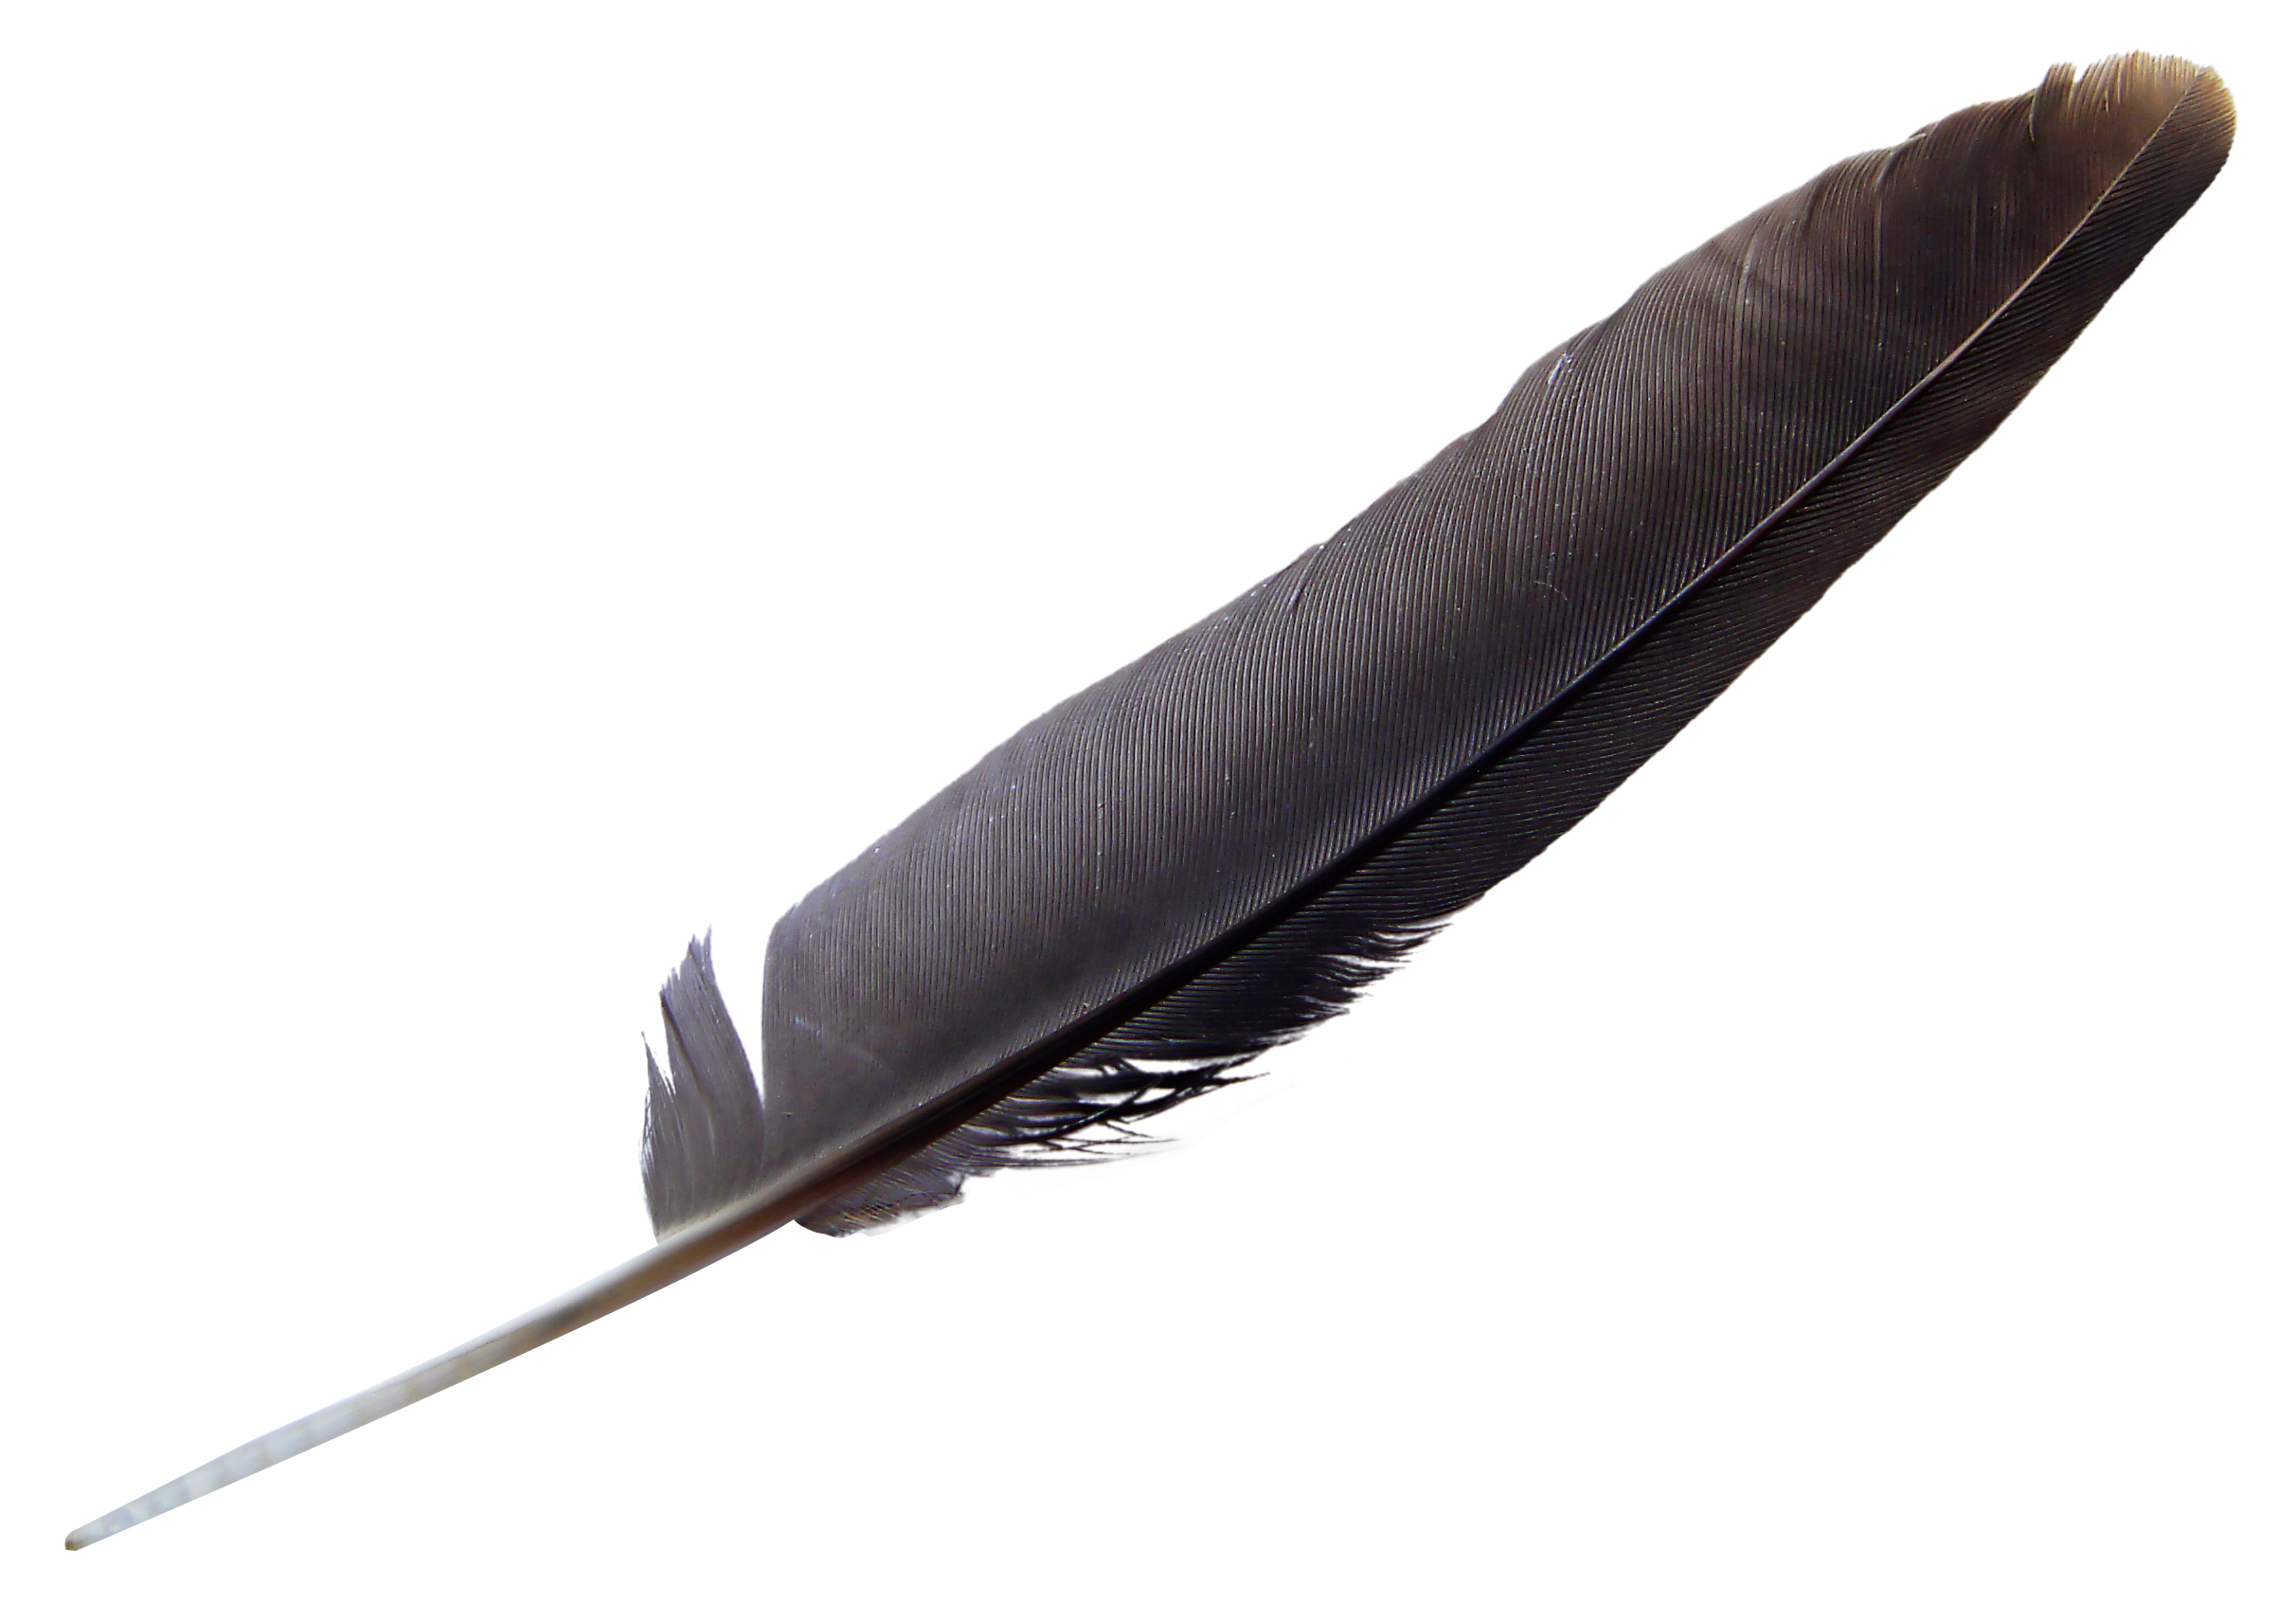 feathers clipart bird feather